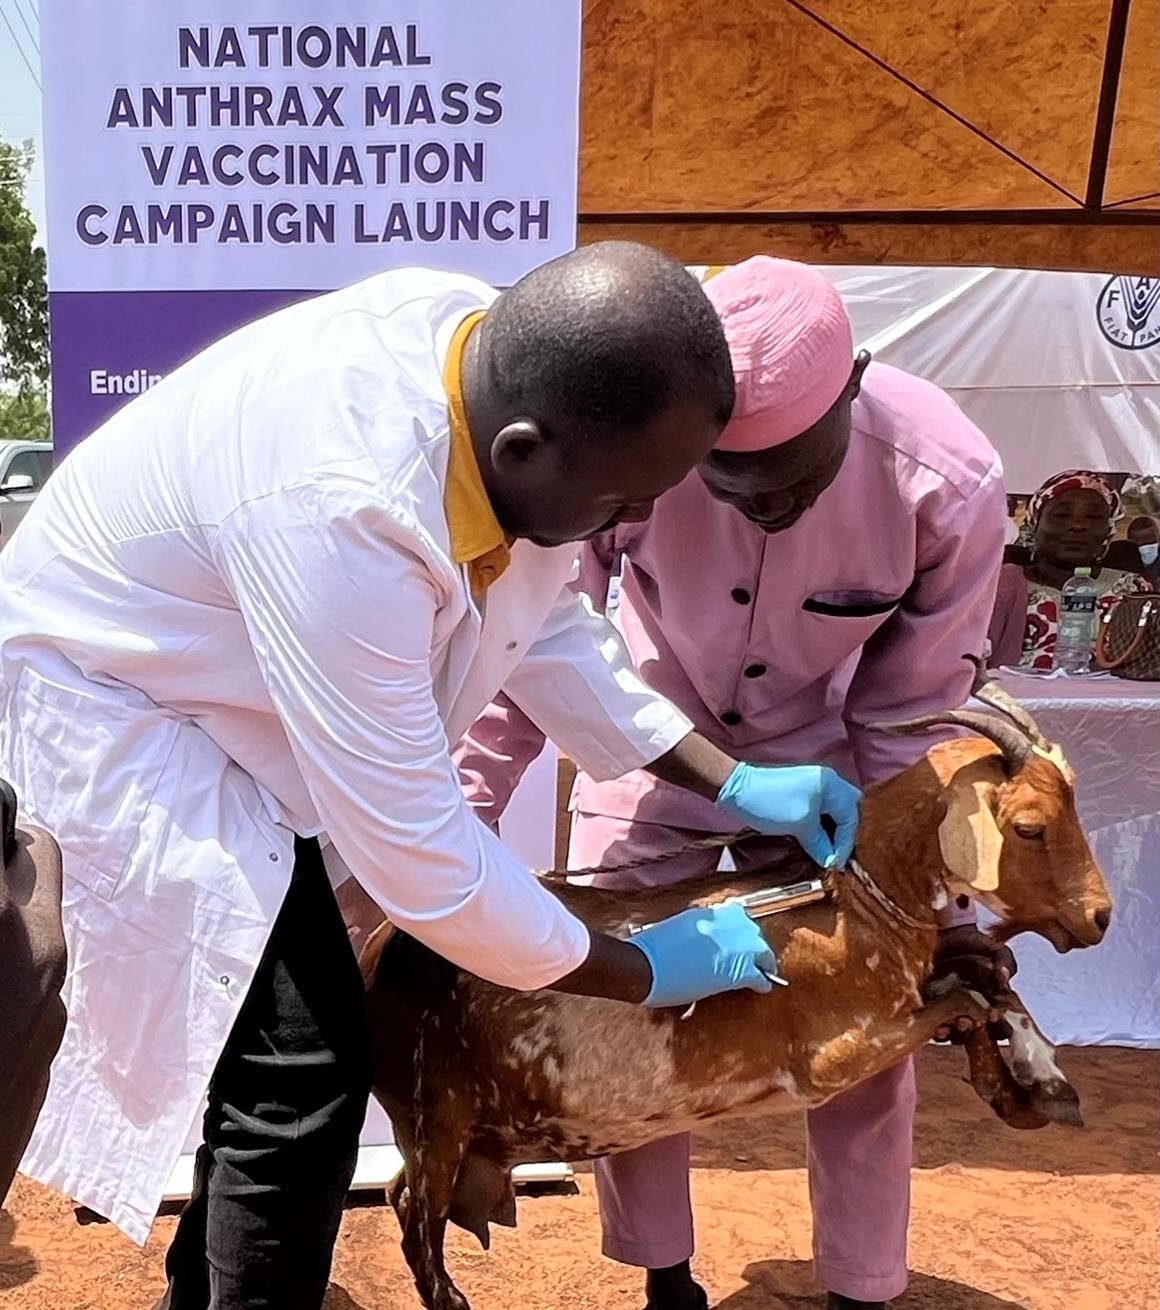 US government donates 100,000 anthrax vaccines to support vaccination campaign in Ghana